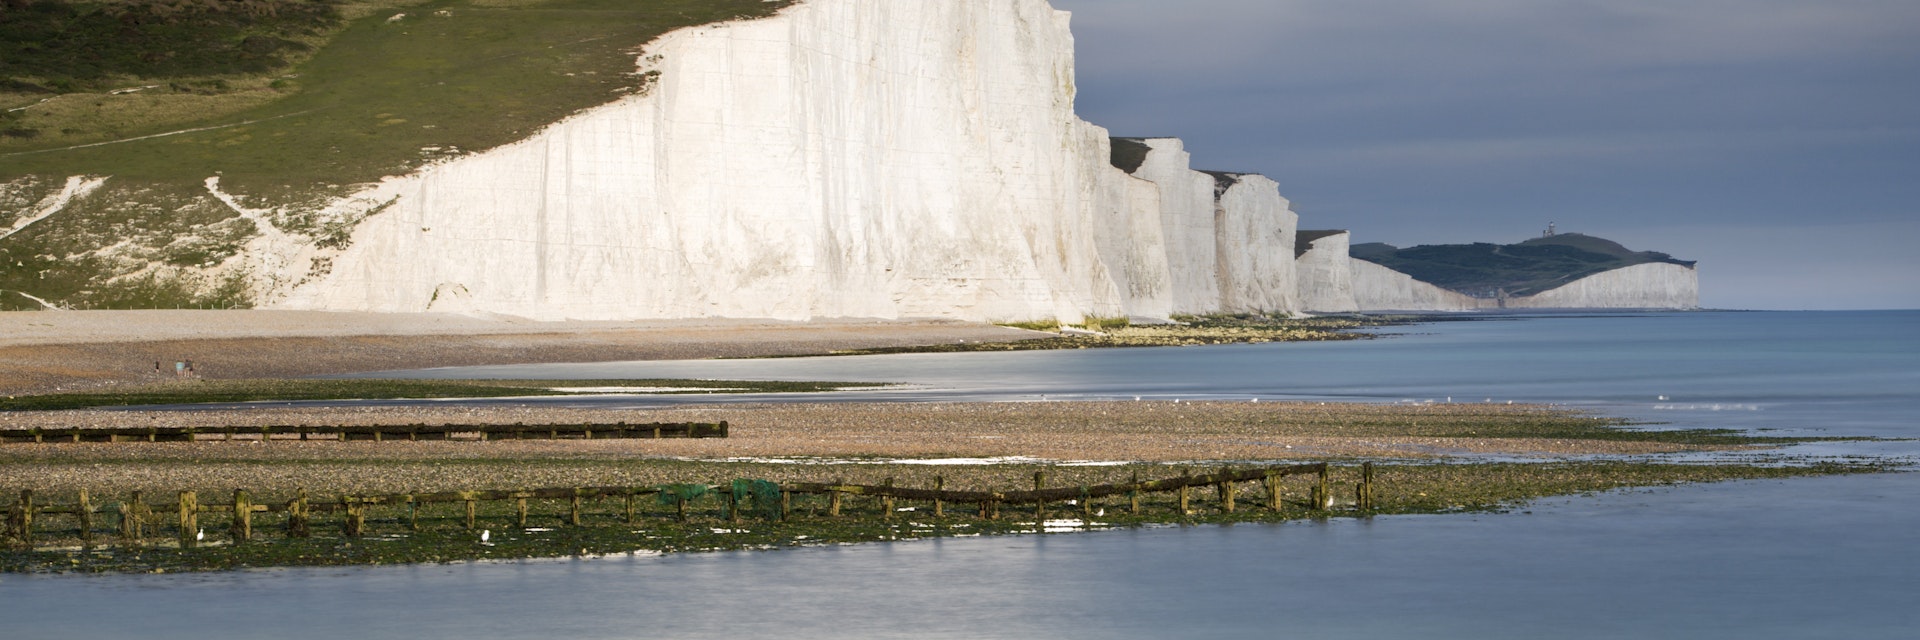 Chalky rock face of Seven Sisters Cliffs.